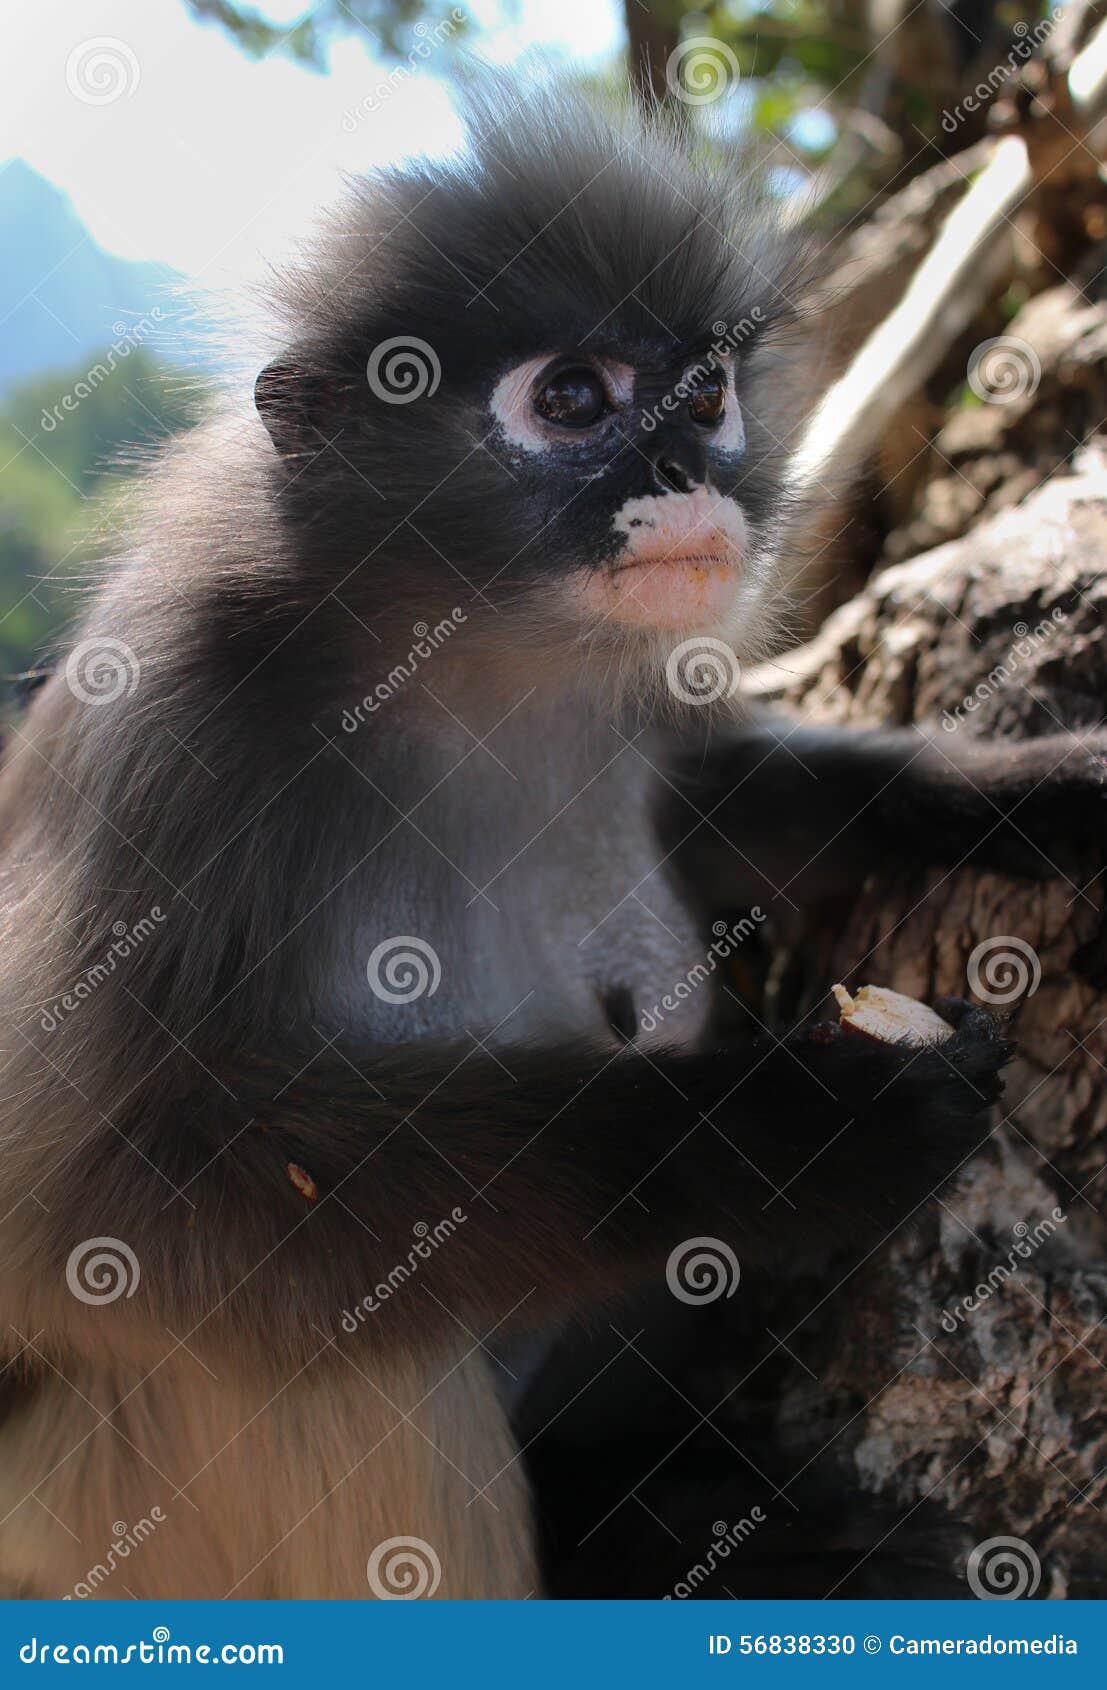 Wild monkey on top of a tree, holding on branches. Primate Macaco